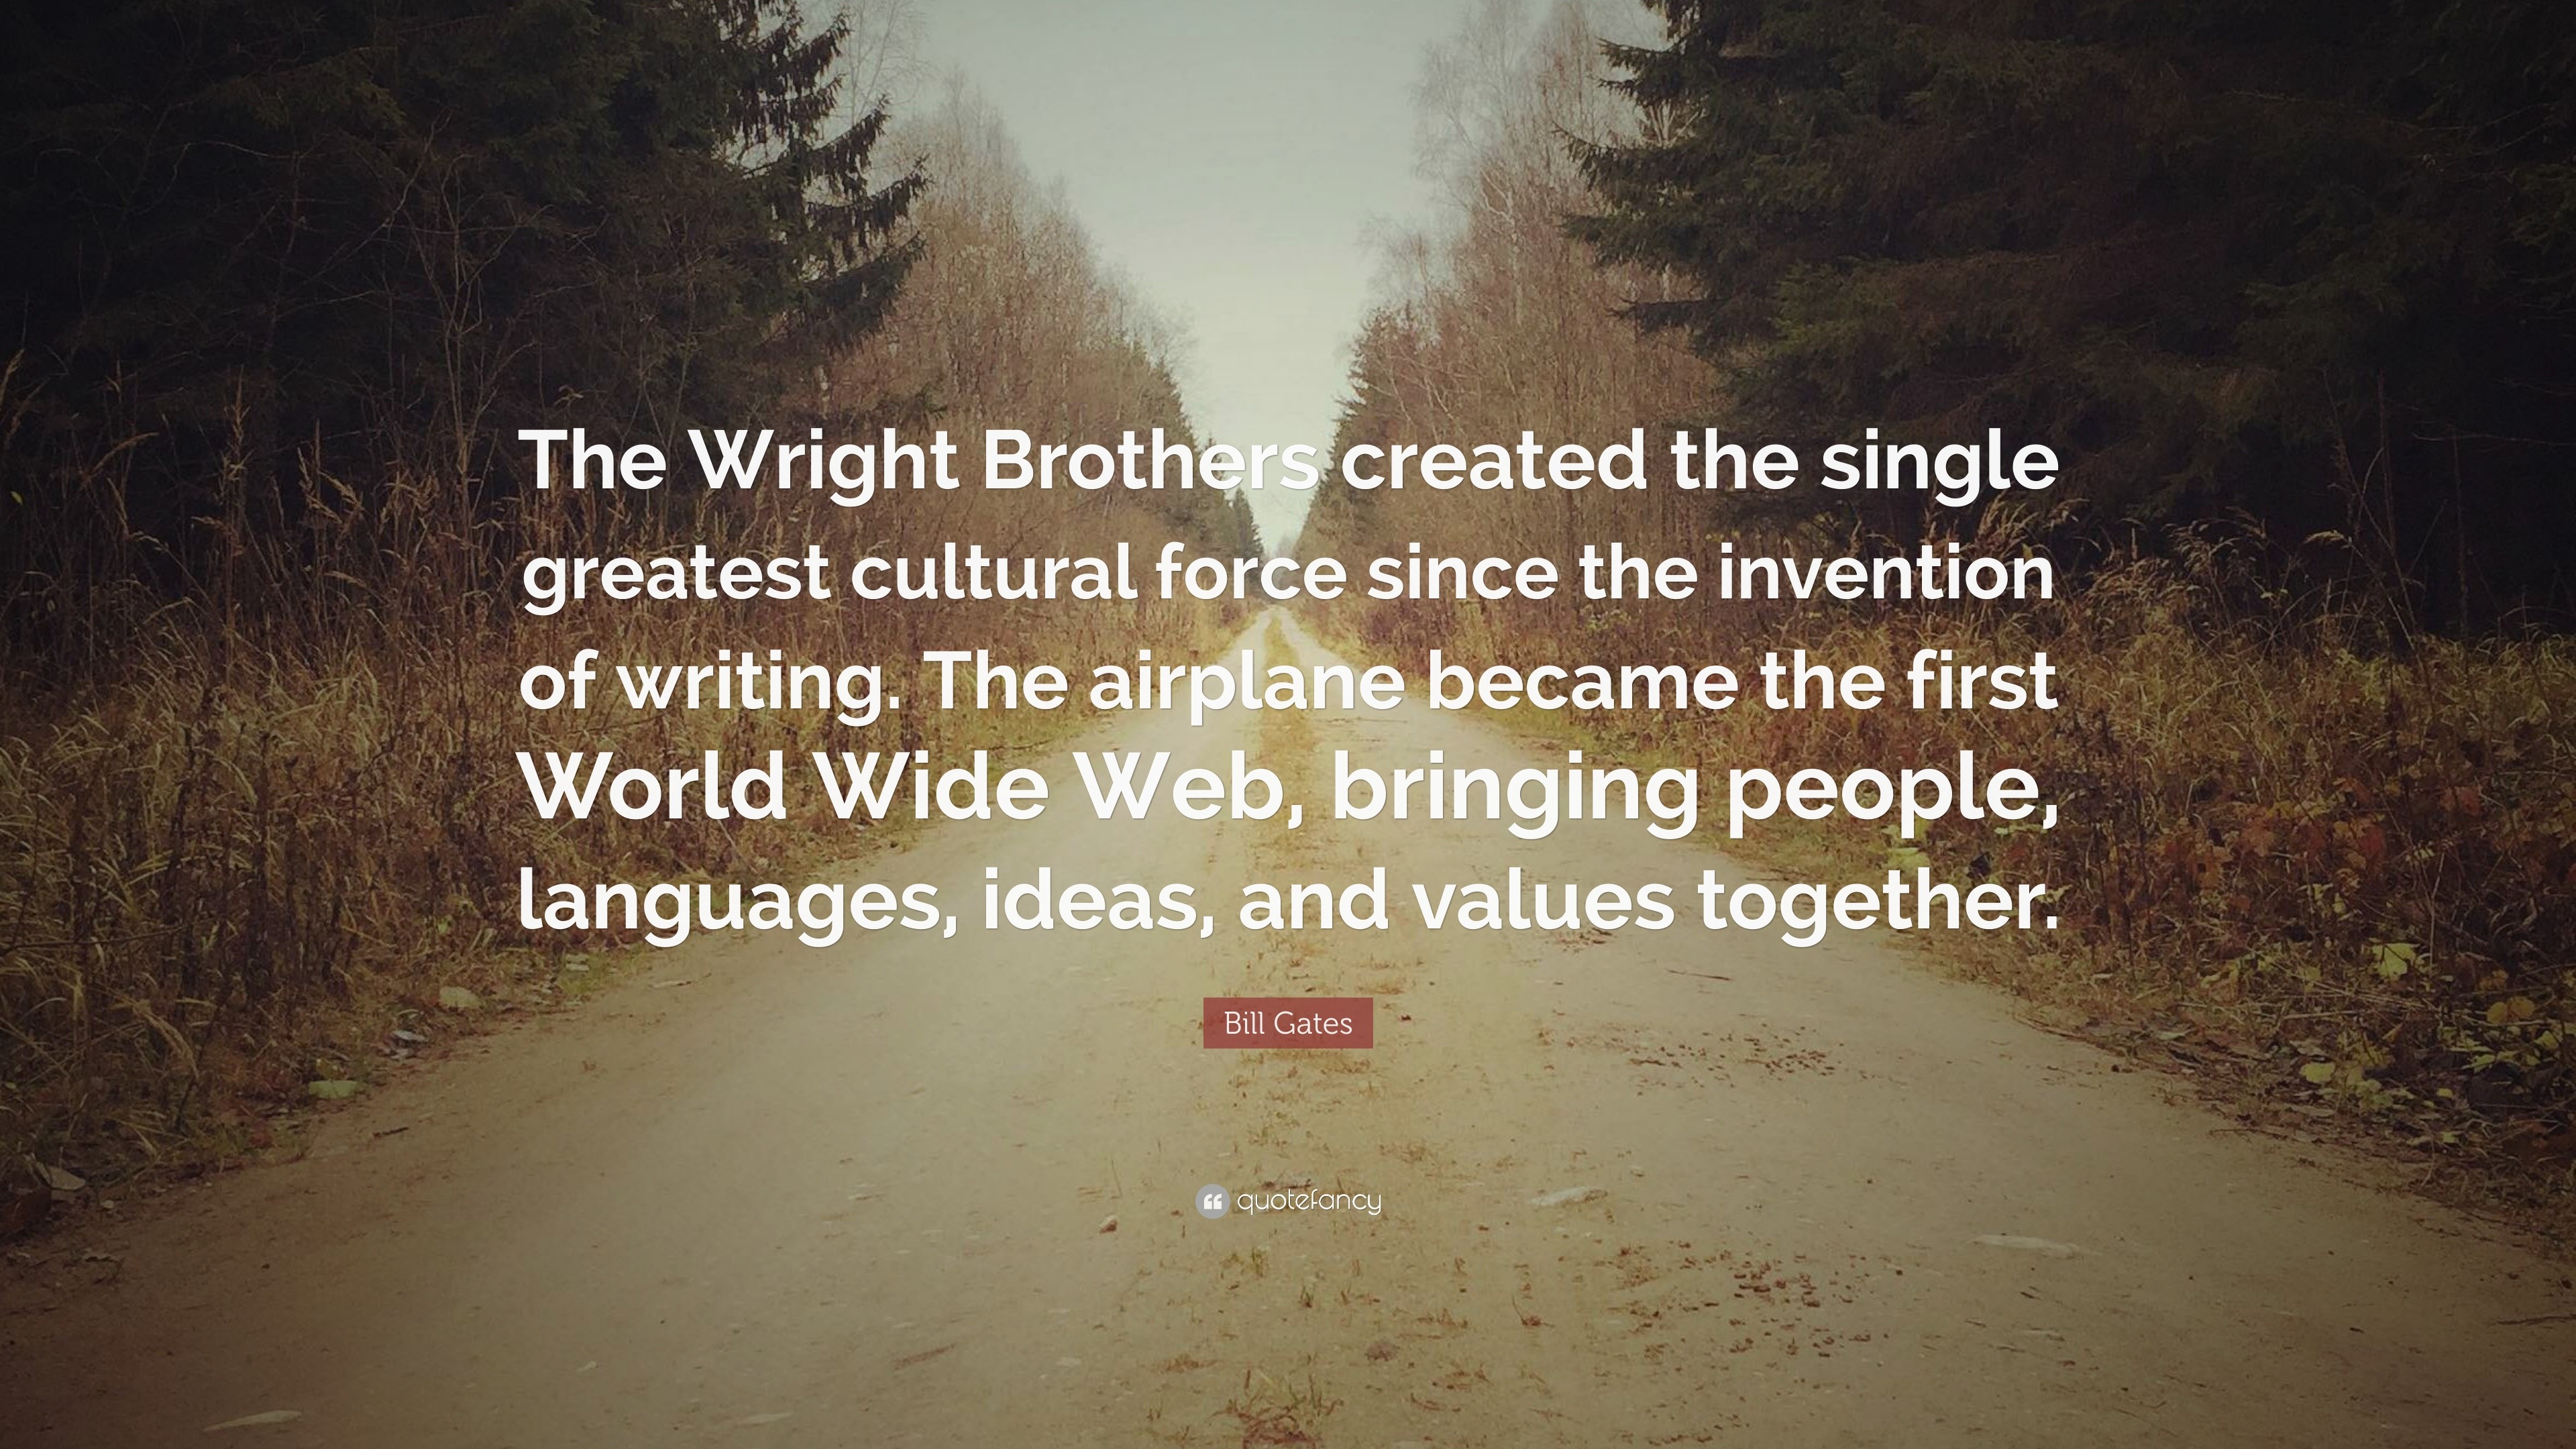 124444 Bill Gates Quote The Wright Brothers created the single greatest